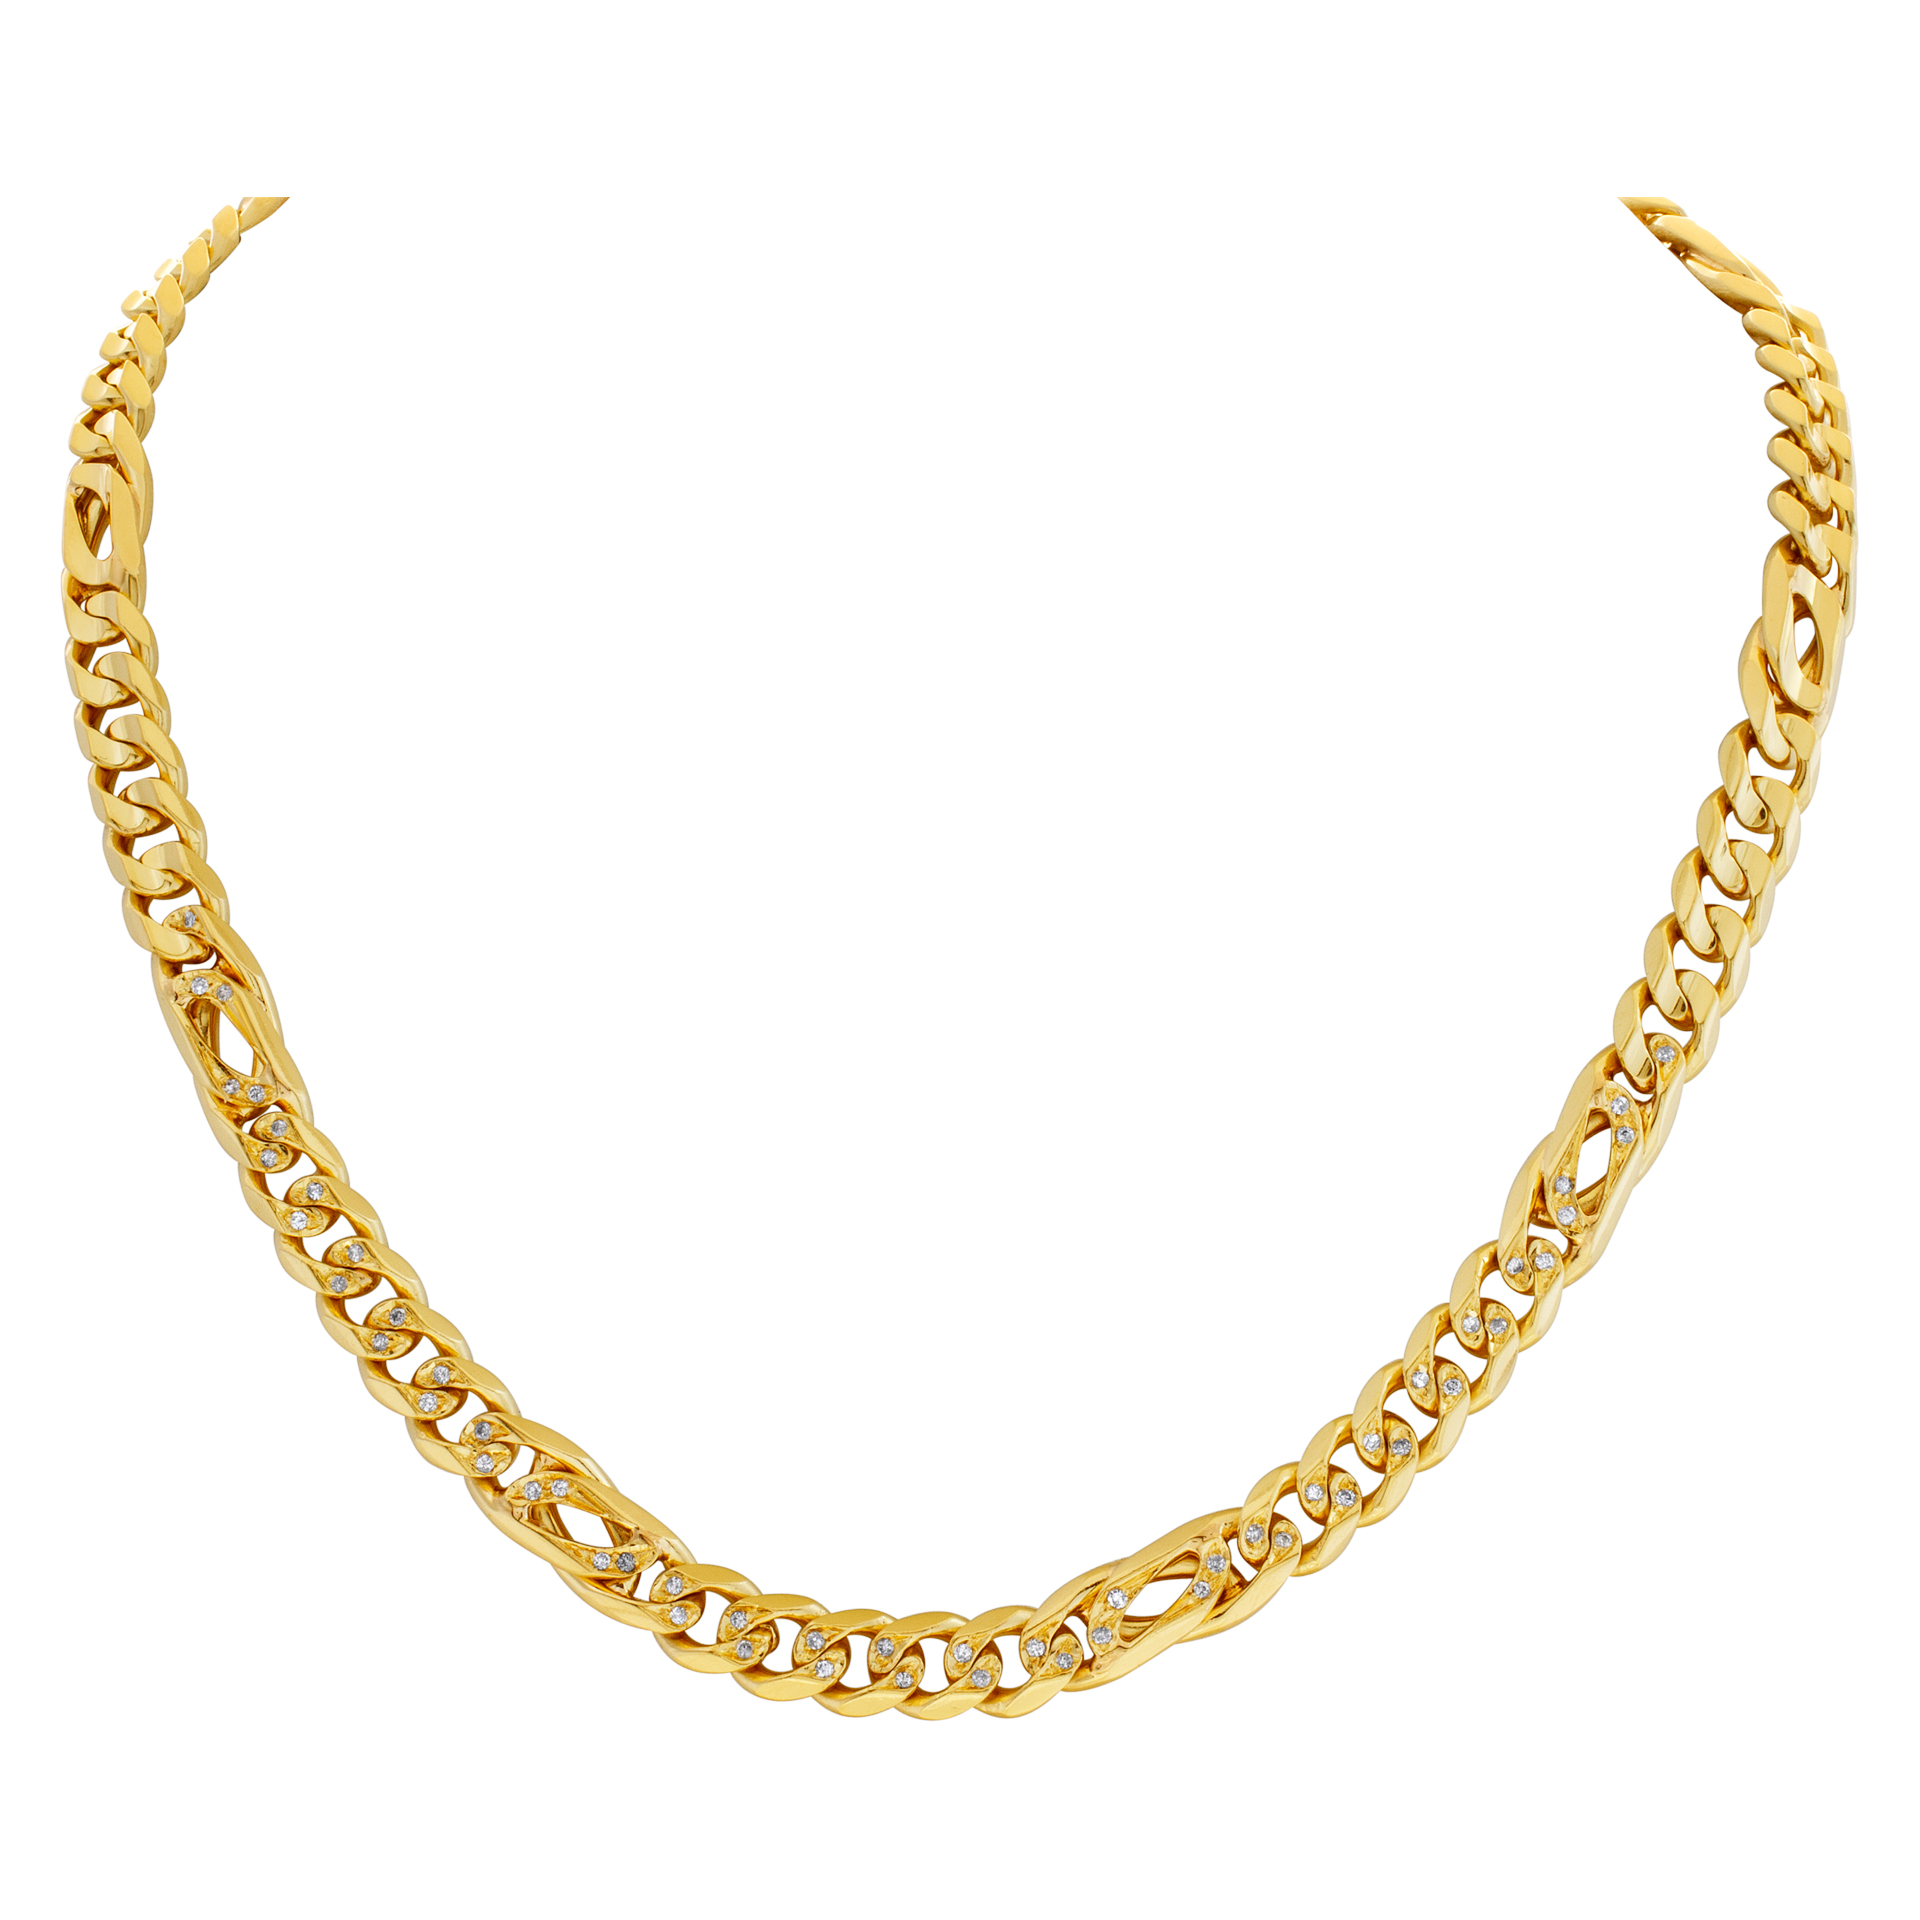 Solid chain necklace in 18k gold, and  approximately 0.50 carat round brilliant cut diamonds